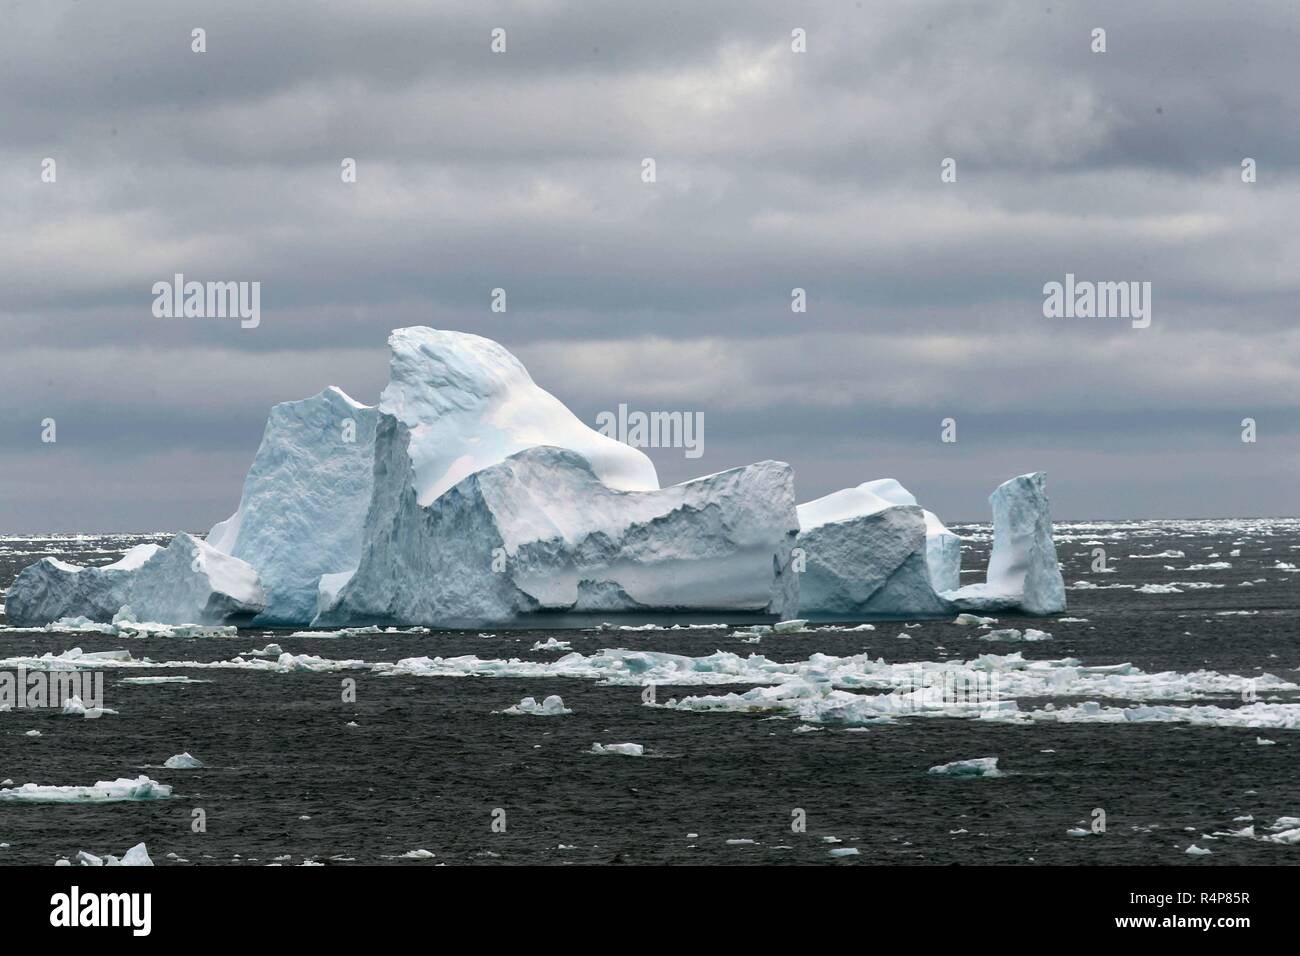 (181128) -- ABOARD XUELONG, Nov. 28, 2018 (Xinhua) -- Photo taken on Nov. 26, 2018 shows iceberg seen from China's research icebreaker Xuelong in a floating ice area in Southern Ocean. China's research icebreaker Xuelong has entered a floating ice area in the Southern Ocean to avoid a cyclone. It is scheduled to reach the Zhongshan Station in Antarctica on Nov. 30. Also known as the Snow Dragon, the icebreaker carrying a research team set sail from Shanghai on Nov. 2, beginning the country's 35th Antarctic expedition which will last 162 days and cover 37,000 nautical miles (68,500 km). (Xinhua Stock Photo